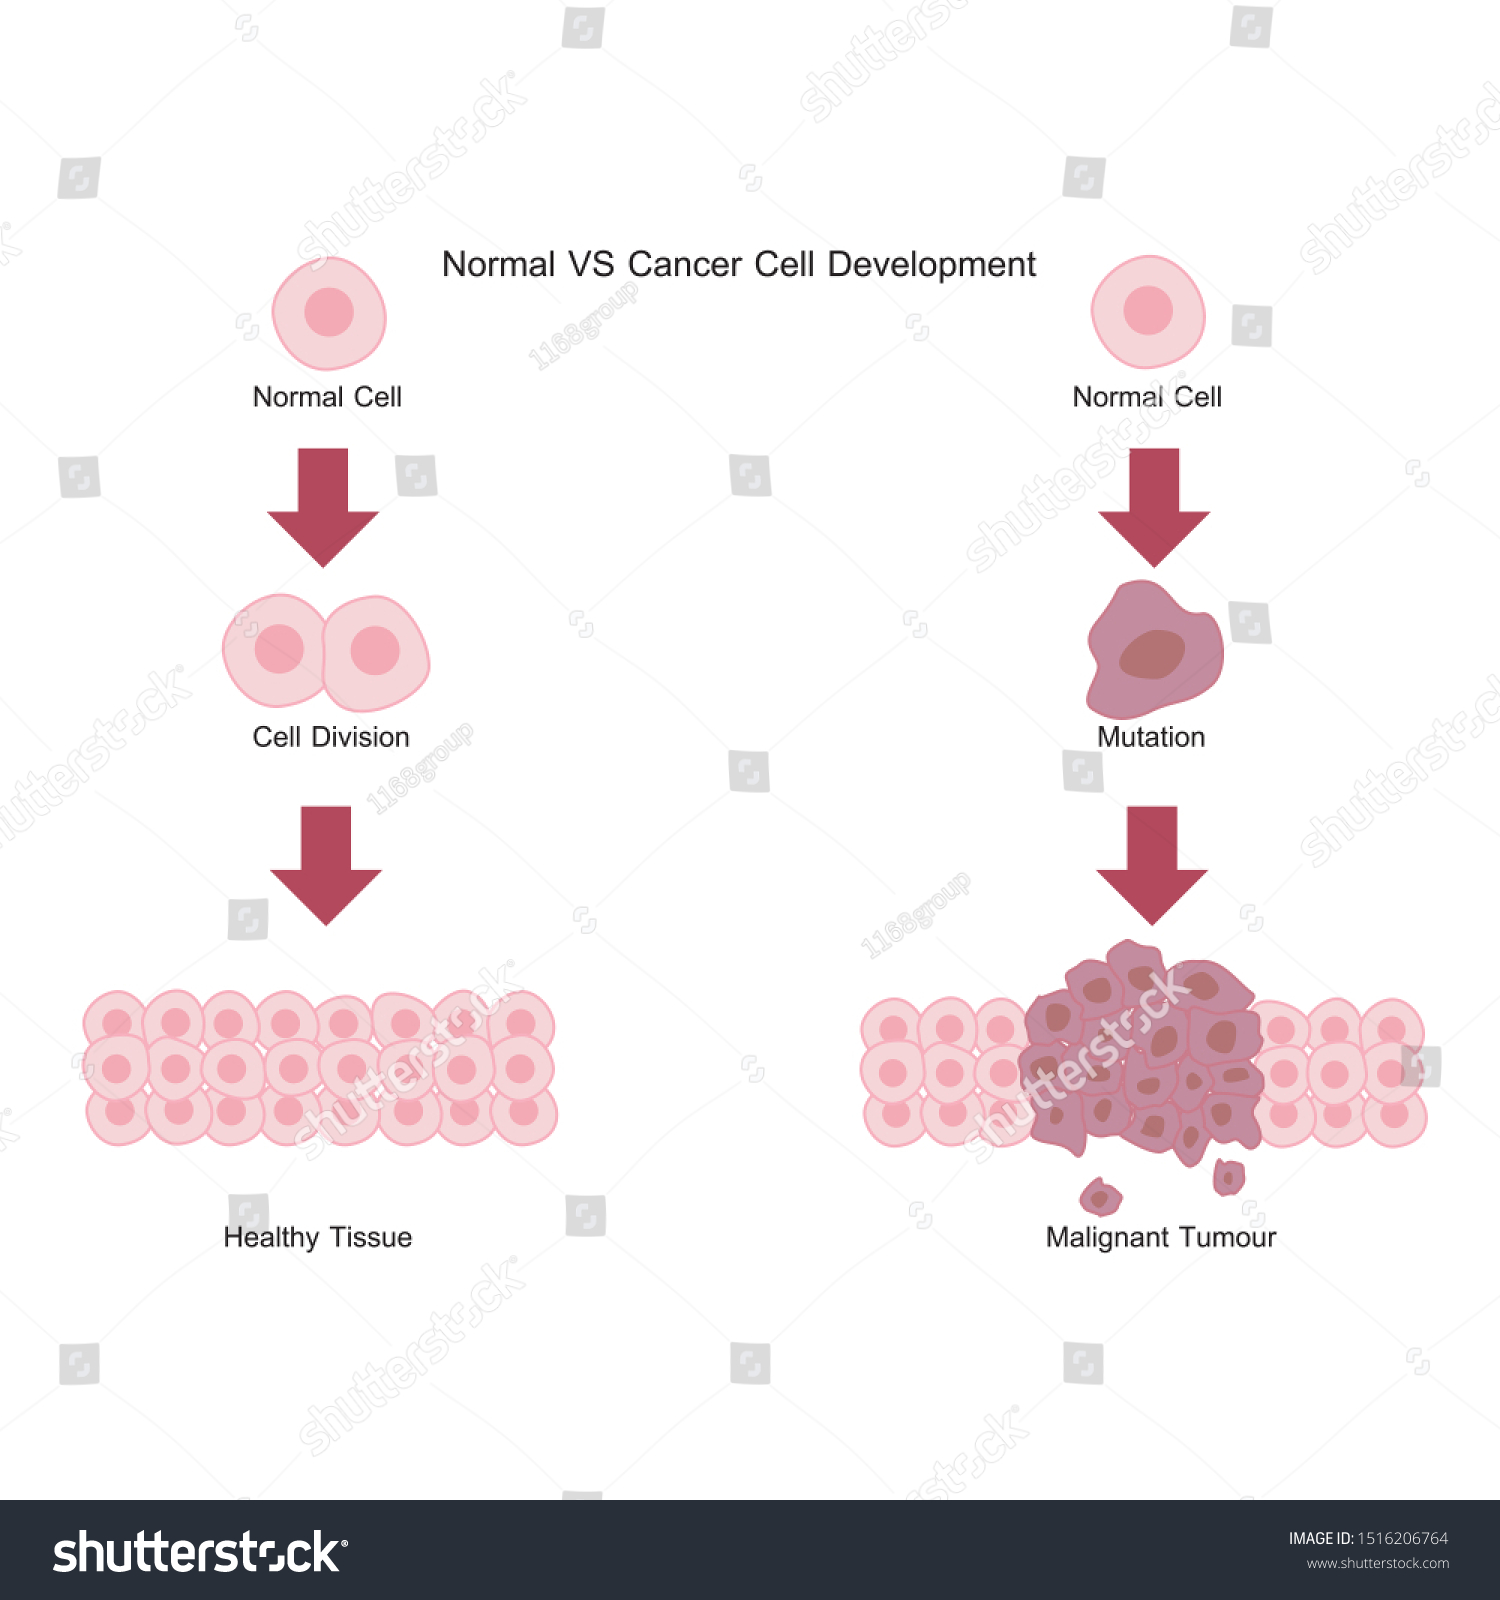 cancer cells vs normal cells chart